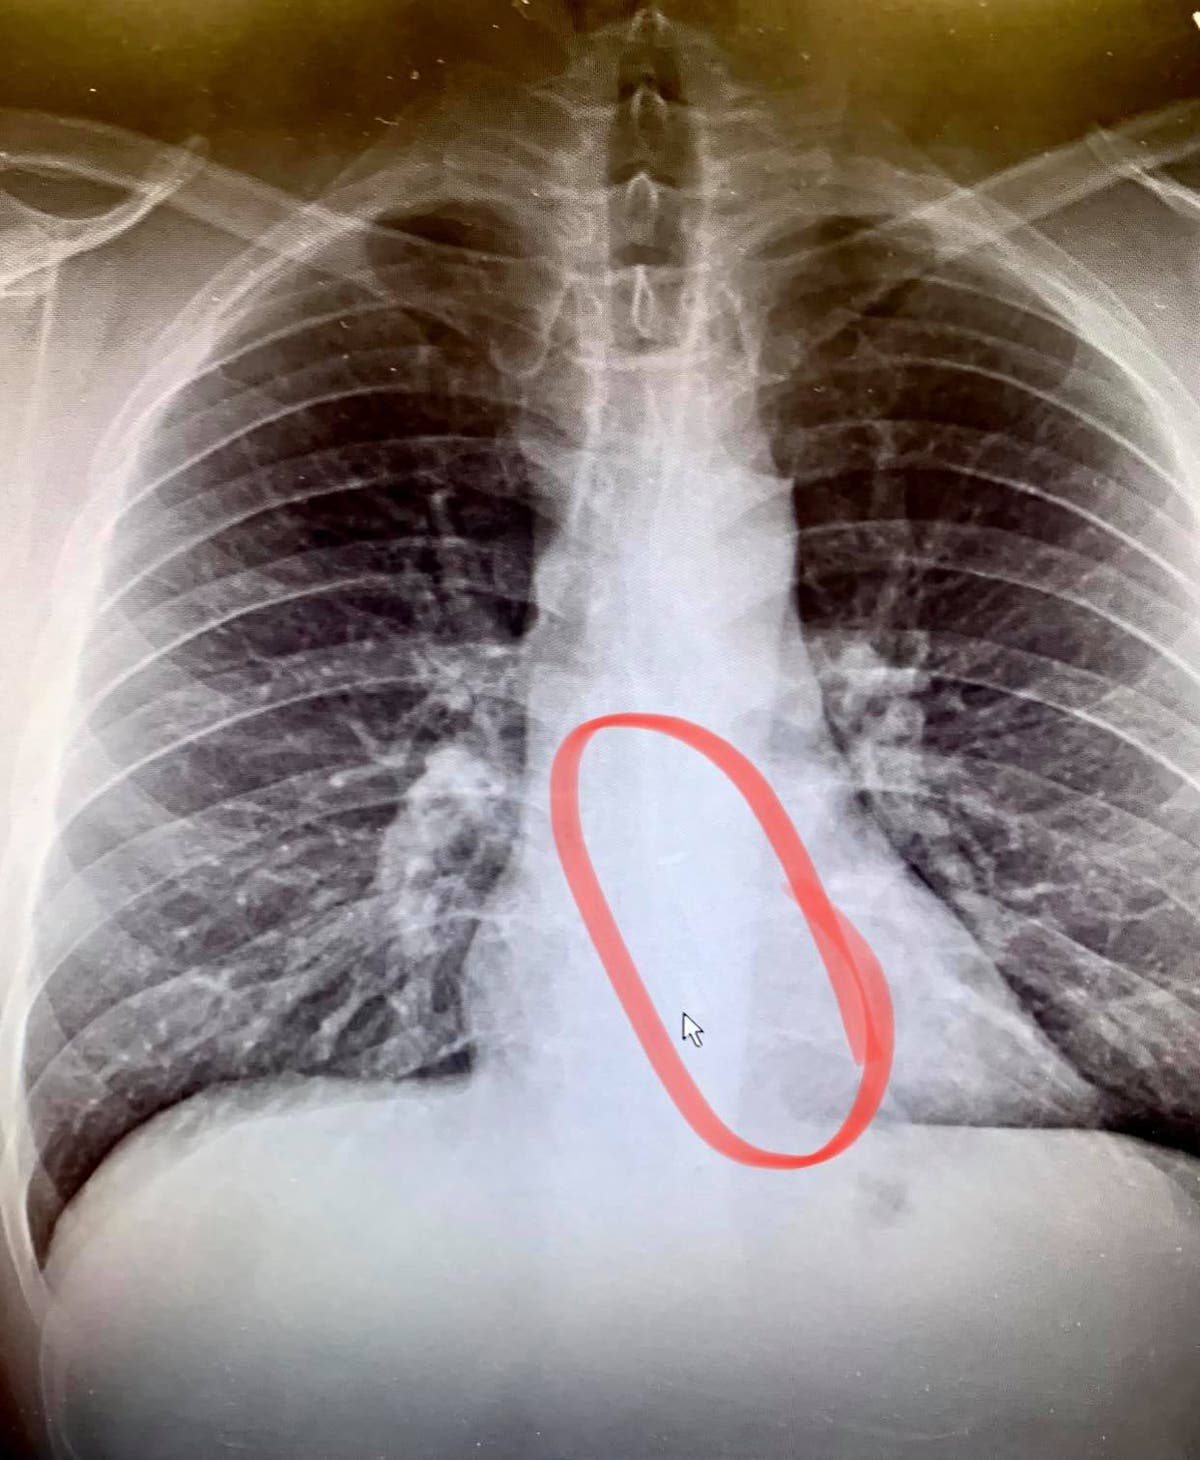 man had to undergo an endoscopy to remove the airpod from his esophagus which he swallowed while sleeping